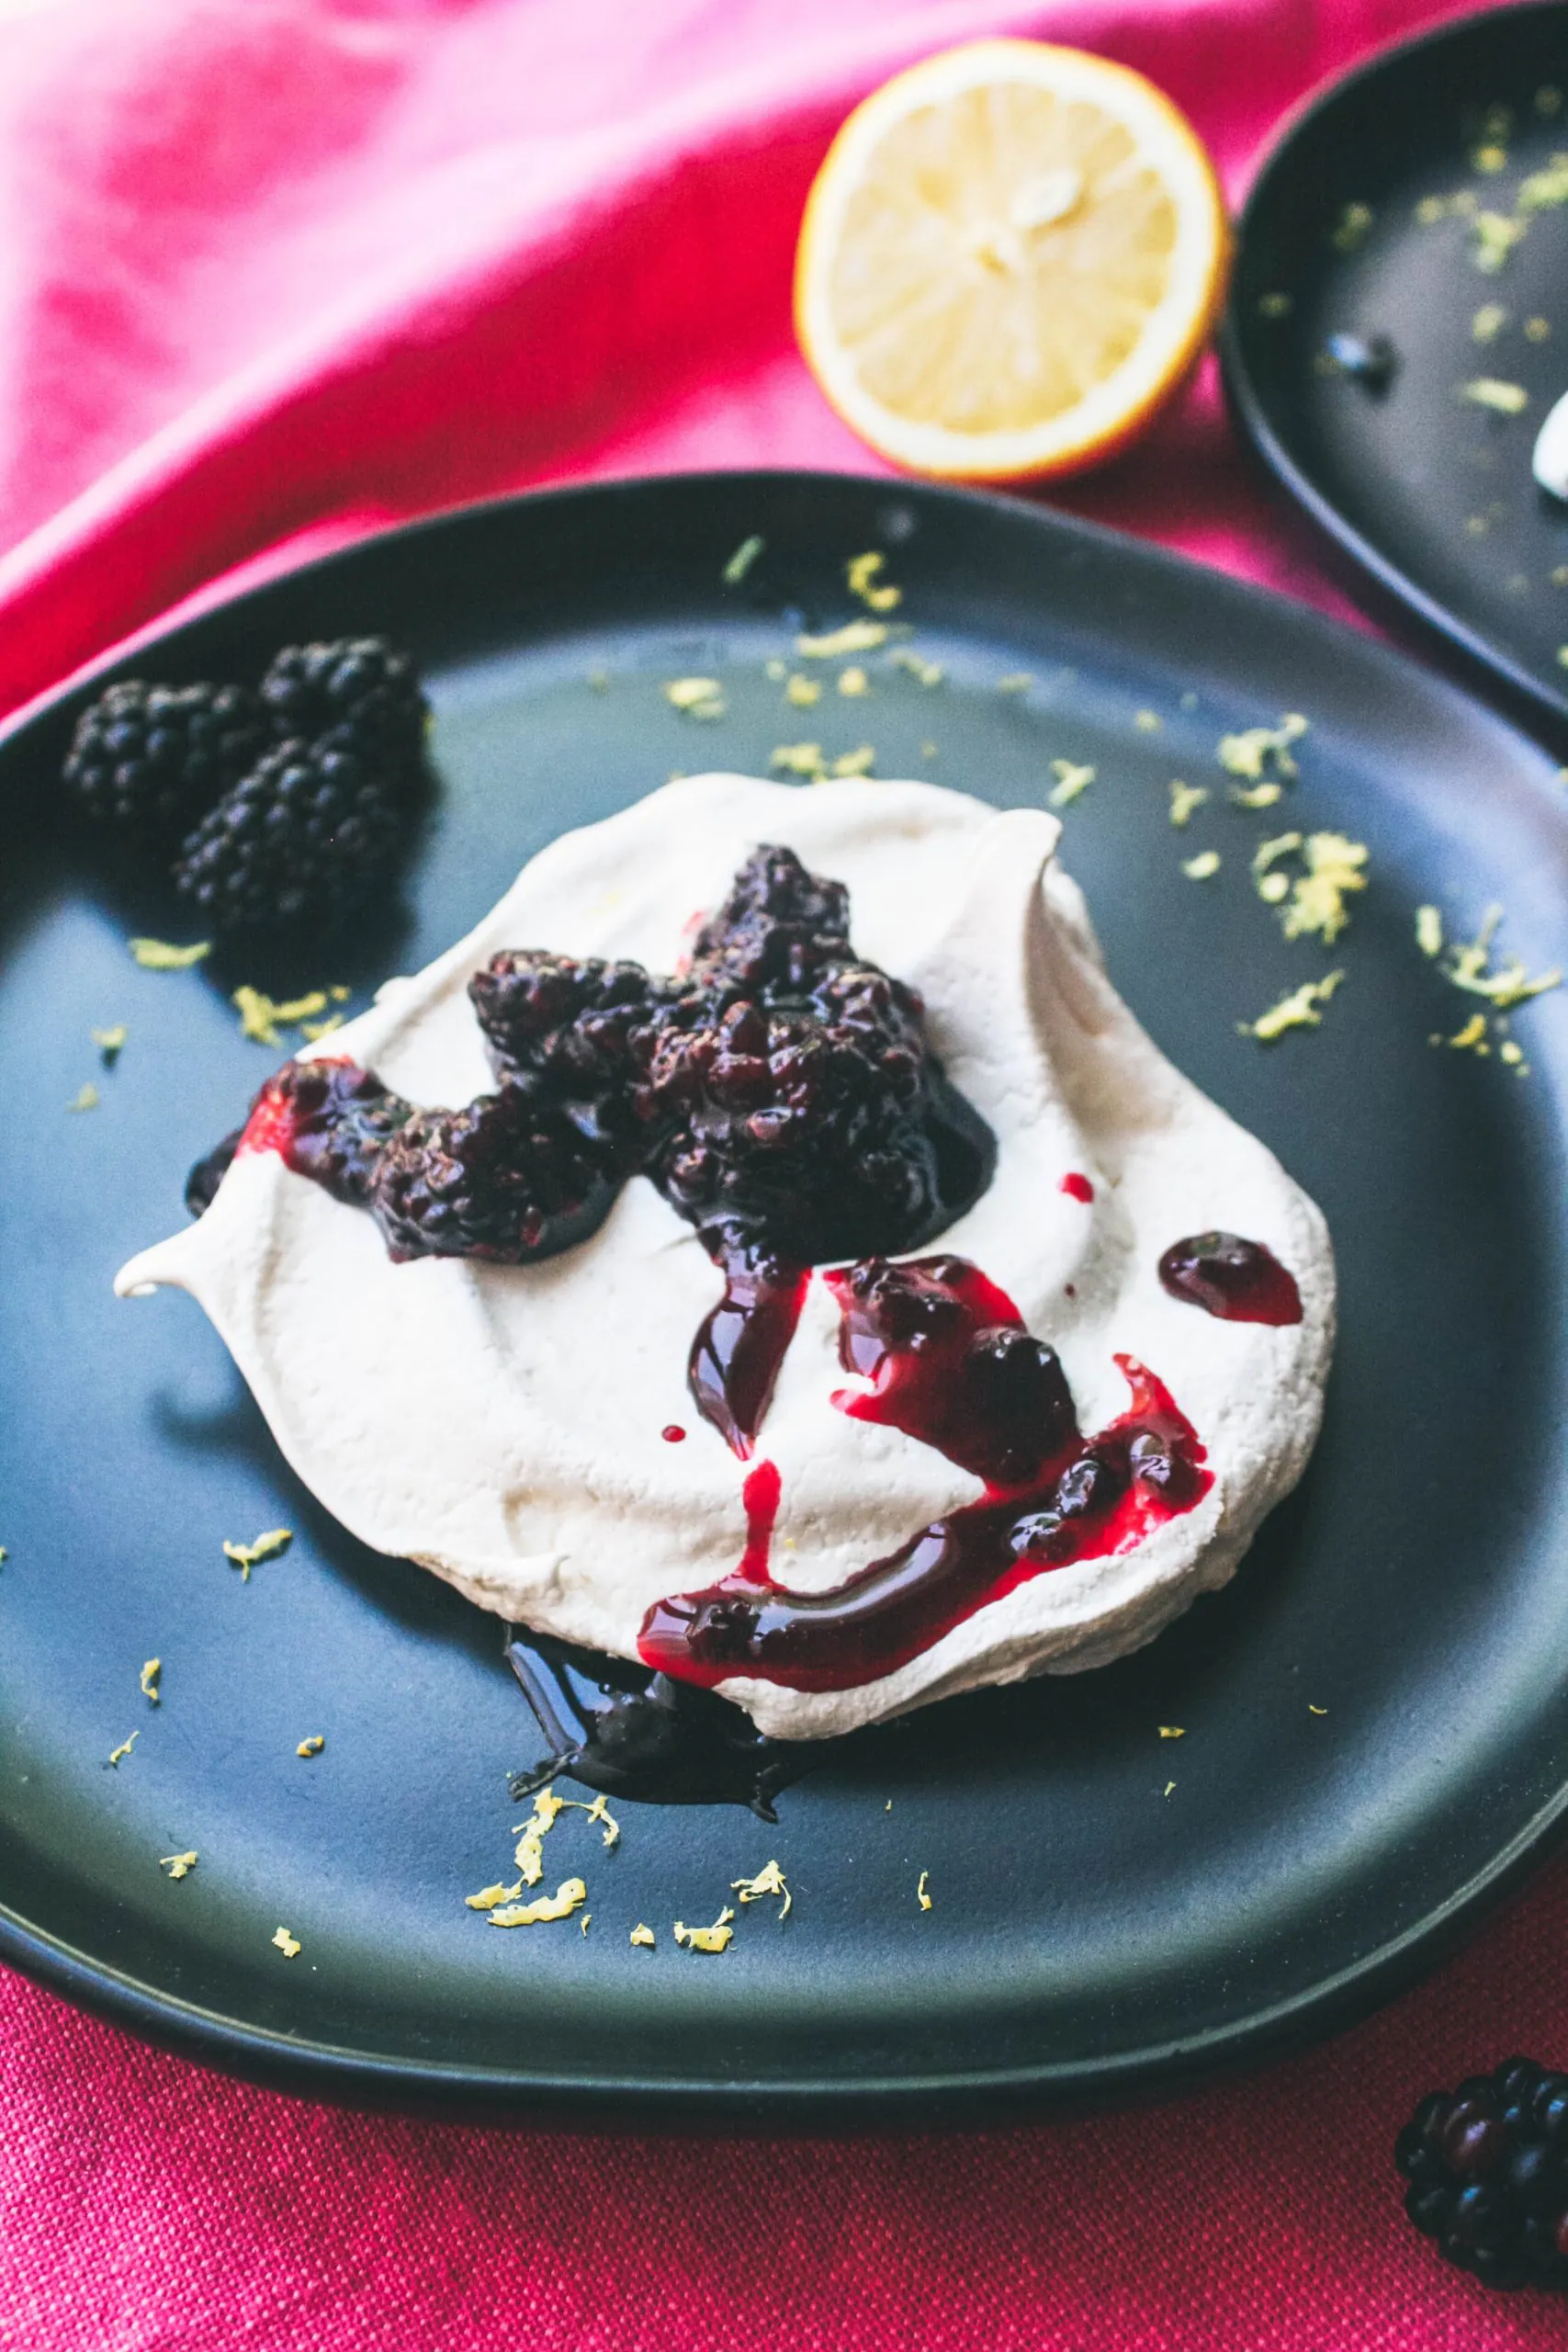 Make Meringue with Blackberry Compote for your next special dessert!